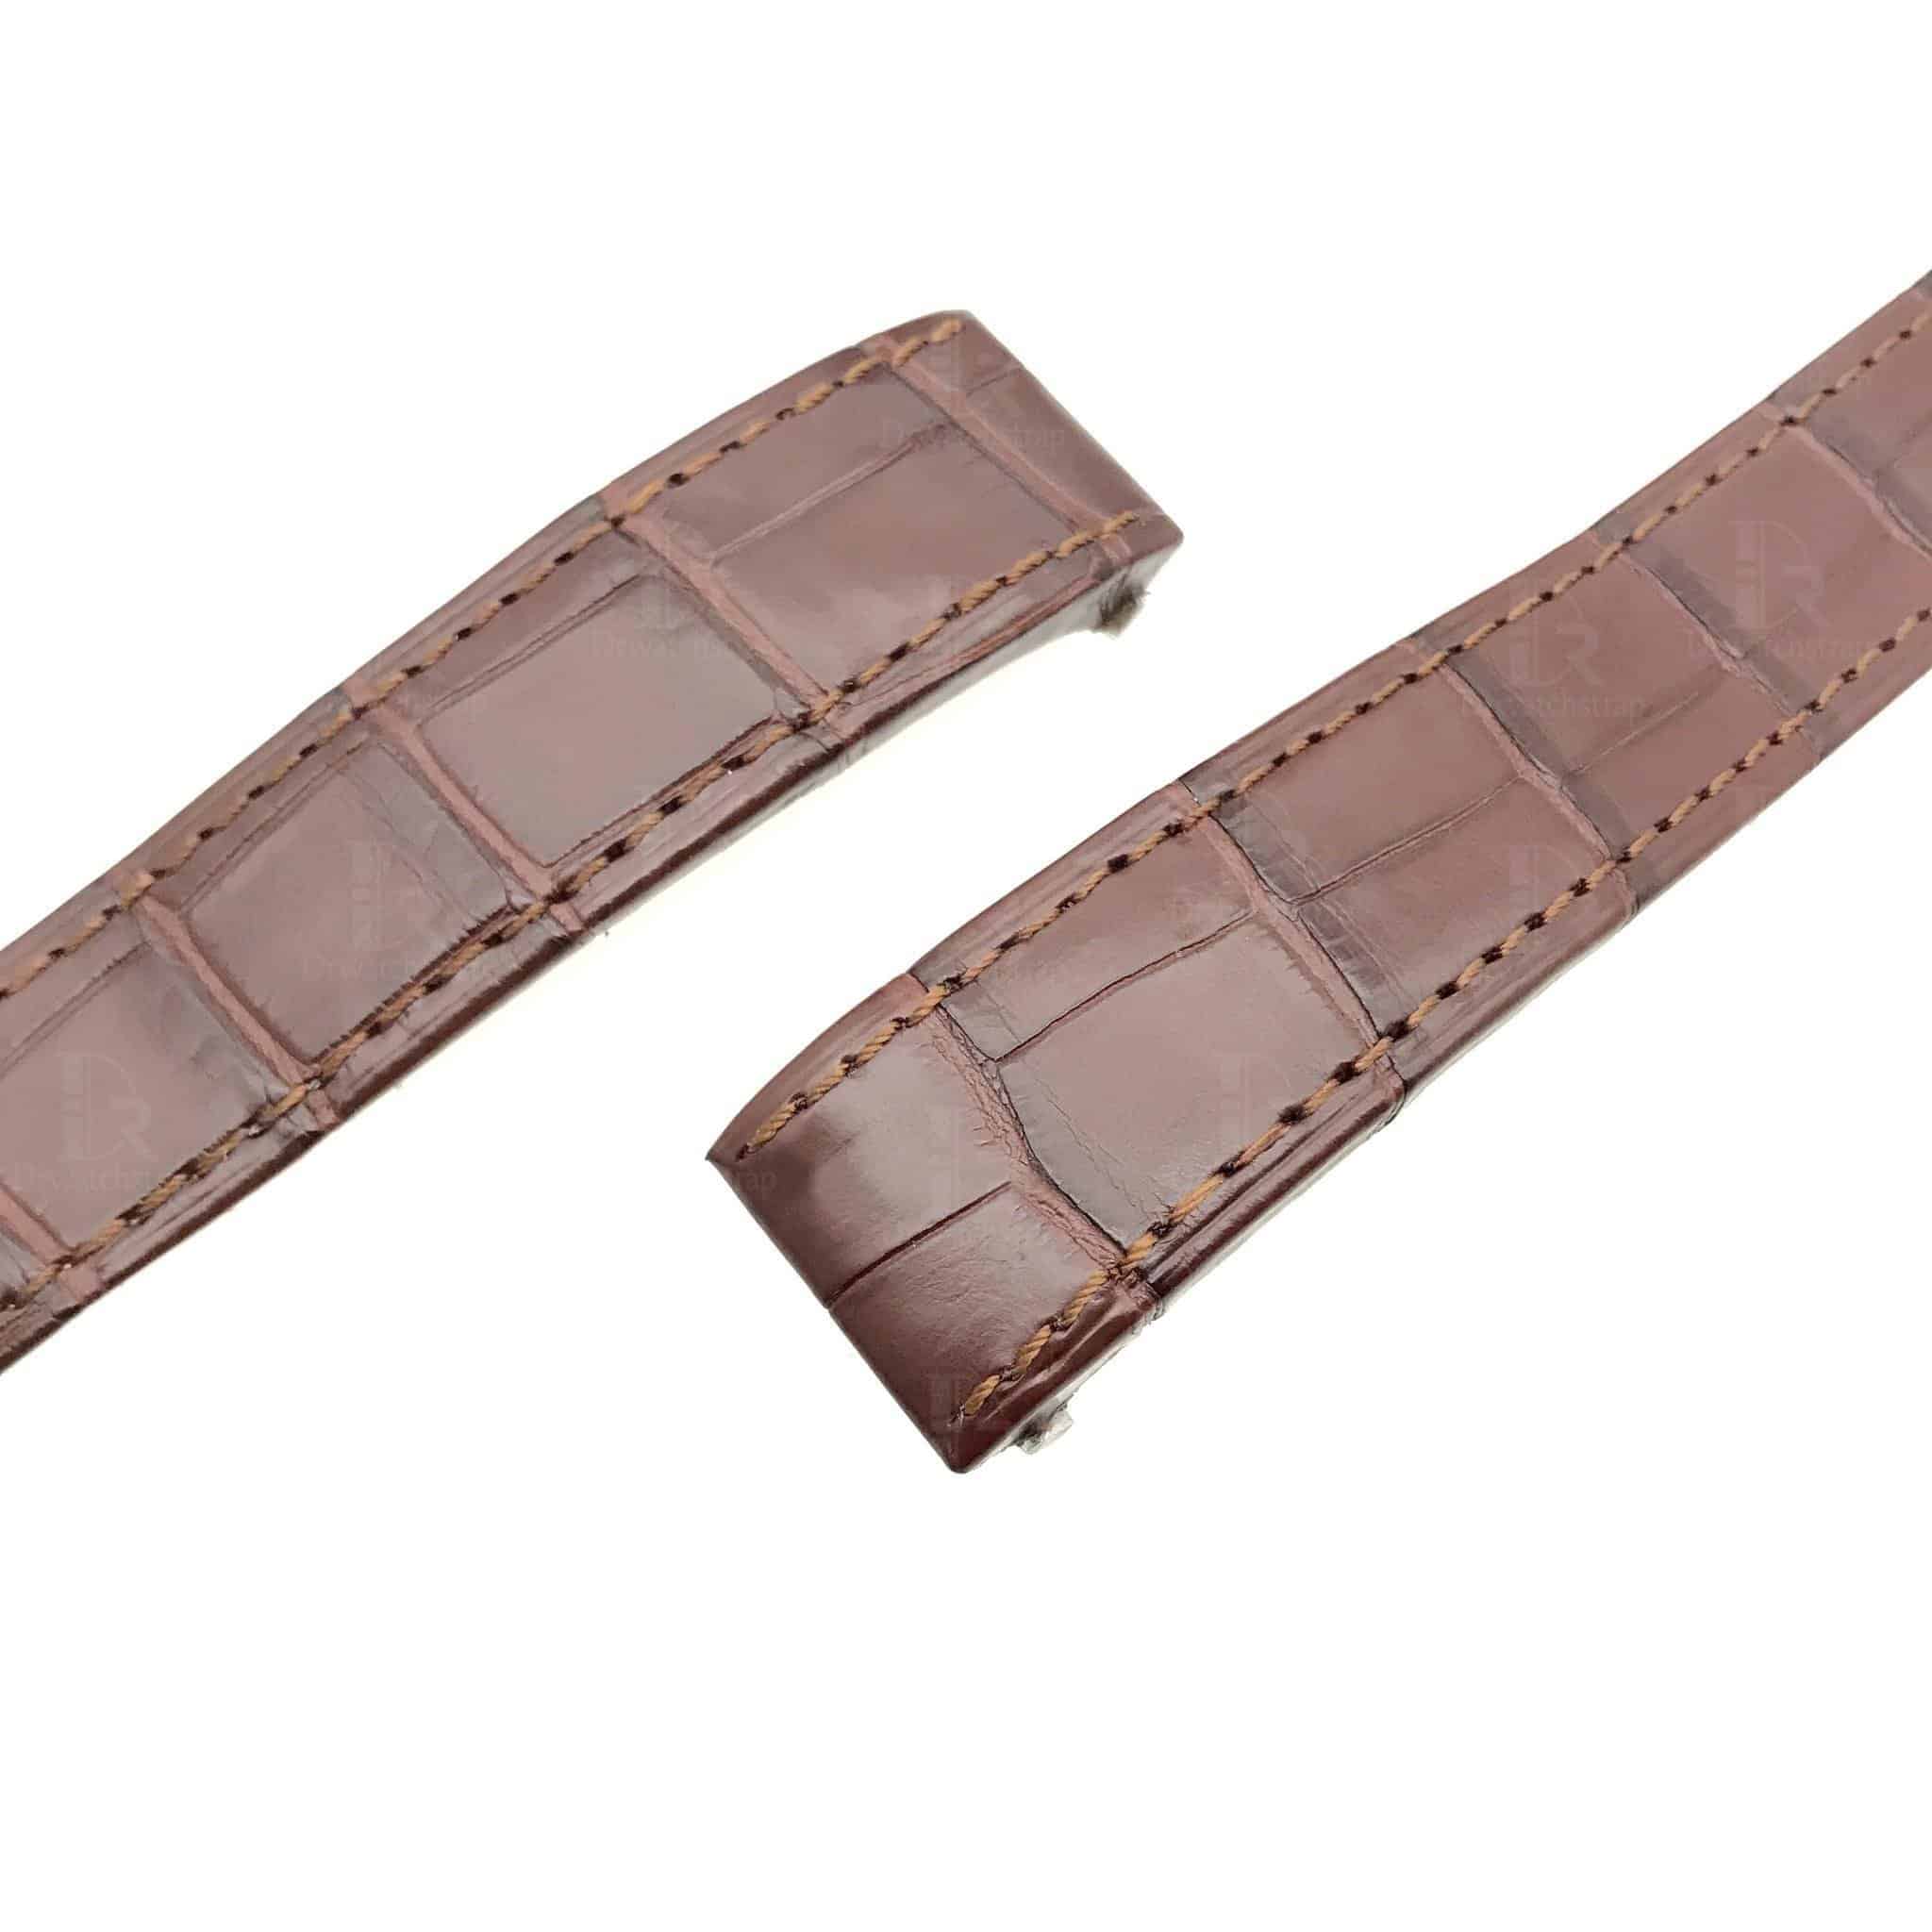 Custom Quickswitch genuine best Alligator Crocodile brown Belly-scale leather straps and watchbands replacement for Cartier Roadster 2510 xl 19mm 20mm watch with quick switch system for sale and easy to change between rubber, kevlar and bracelets straps for mens and womens - Quick release leather strap and watch band from DR Watchstrap free shipping to US, UK and whole world